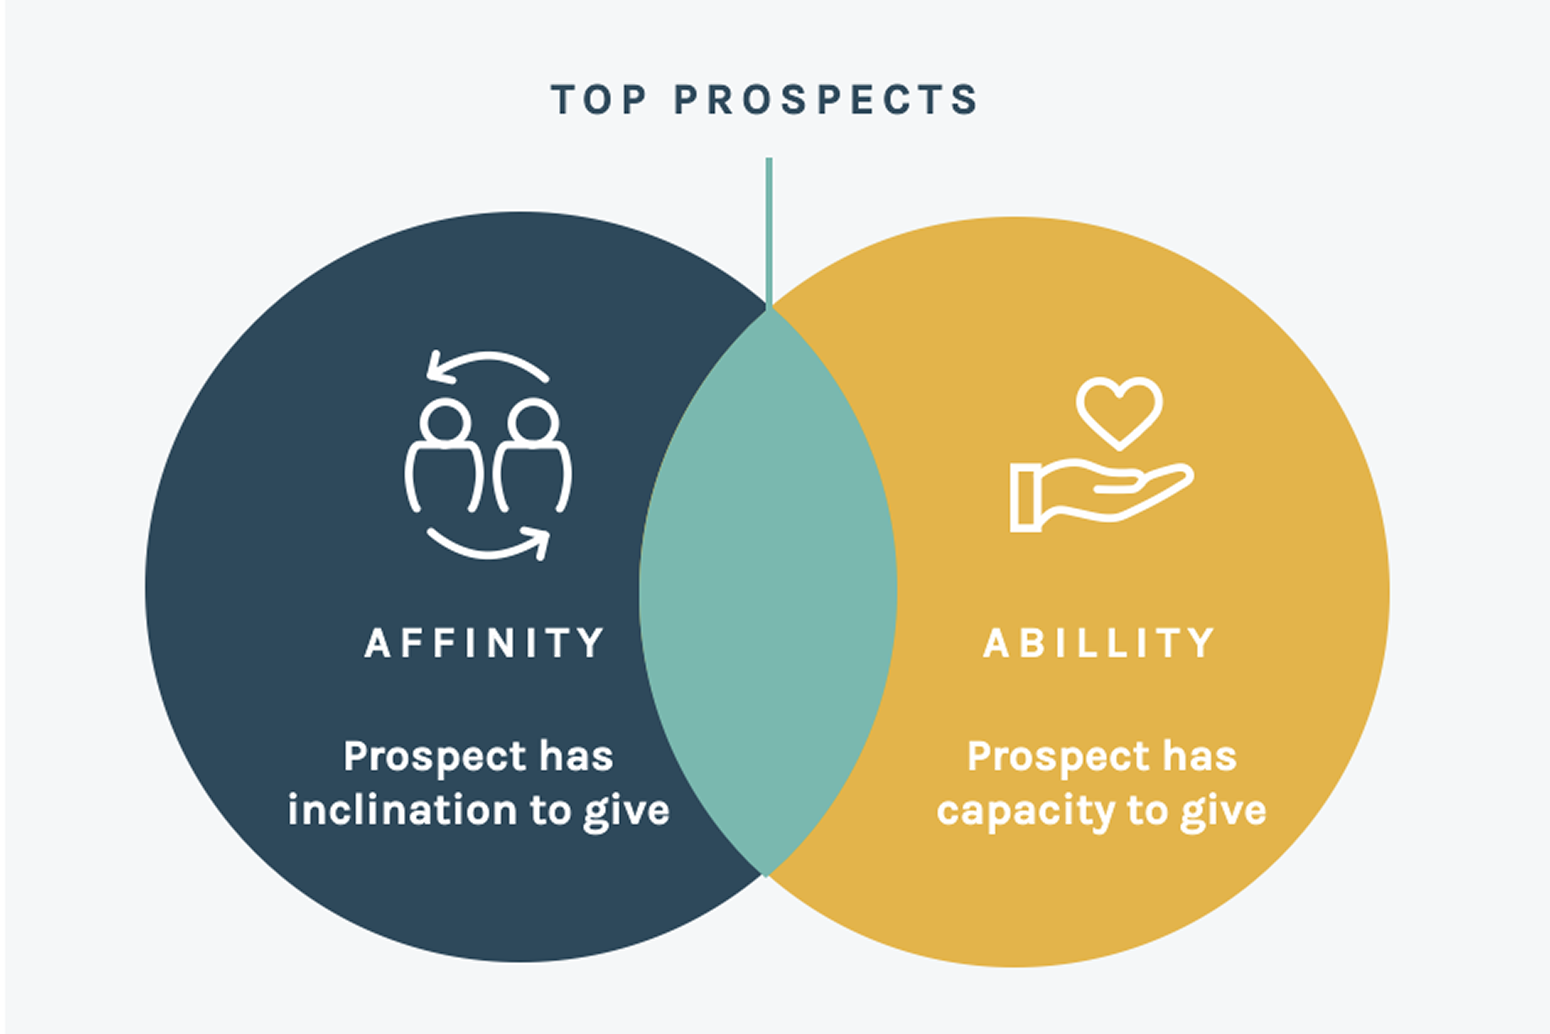 A Venn Diagram showing  how top prospects are at the intersection of Affinity (Prospect has inclination to give) and Ability (Prospect has capacity to give).